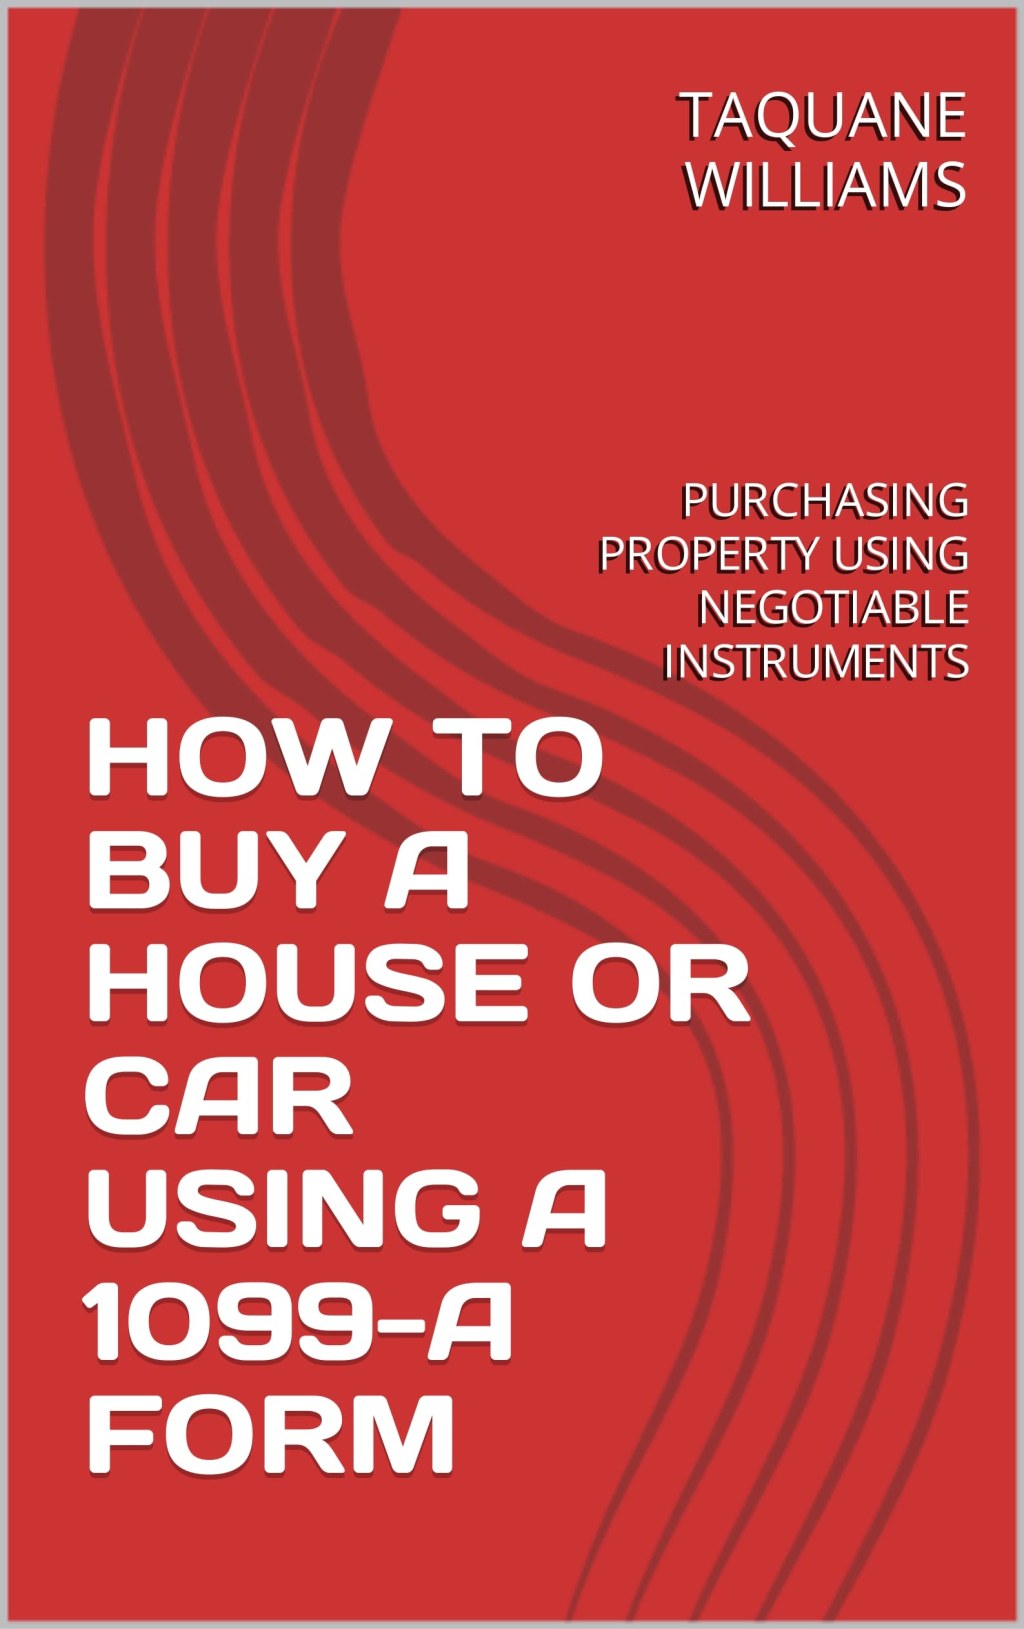 Picture of: HOW TO BUY A HOUSE OR CAR USING A -A FORM: PURCHASING PROPERTY